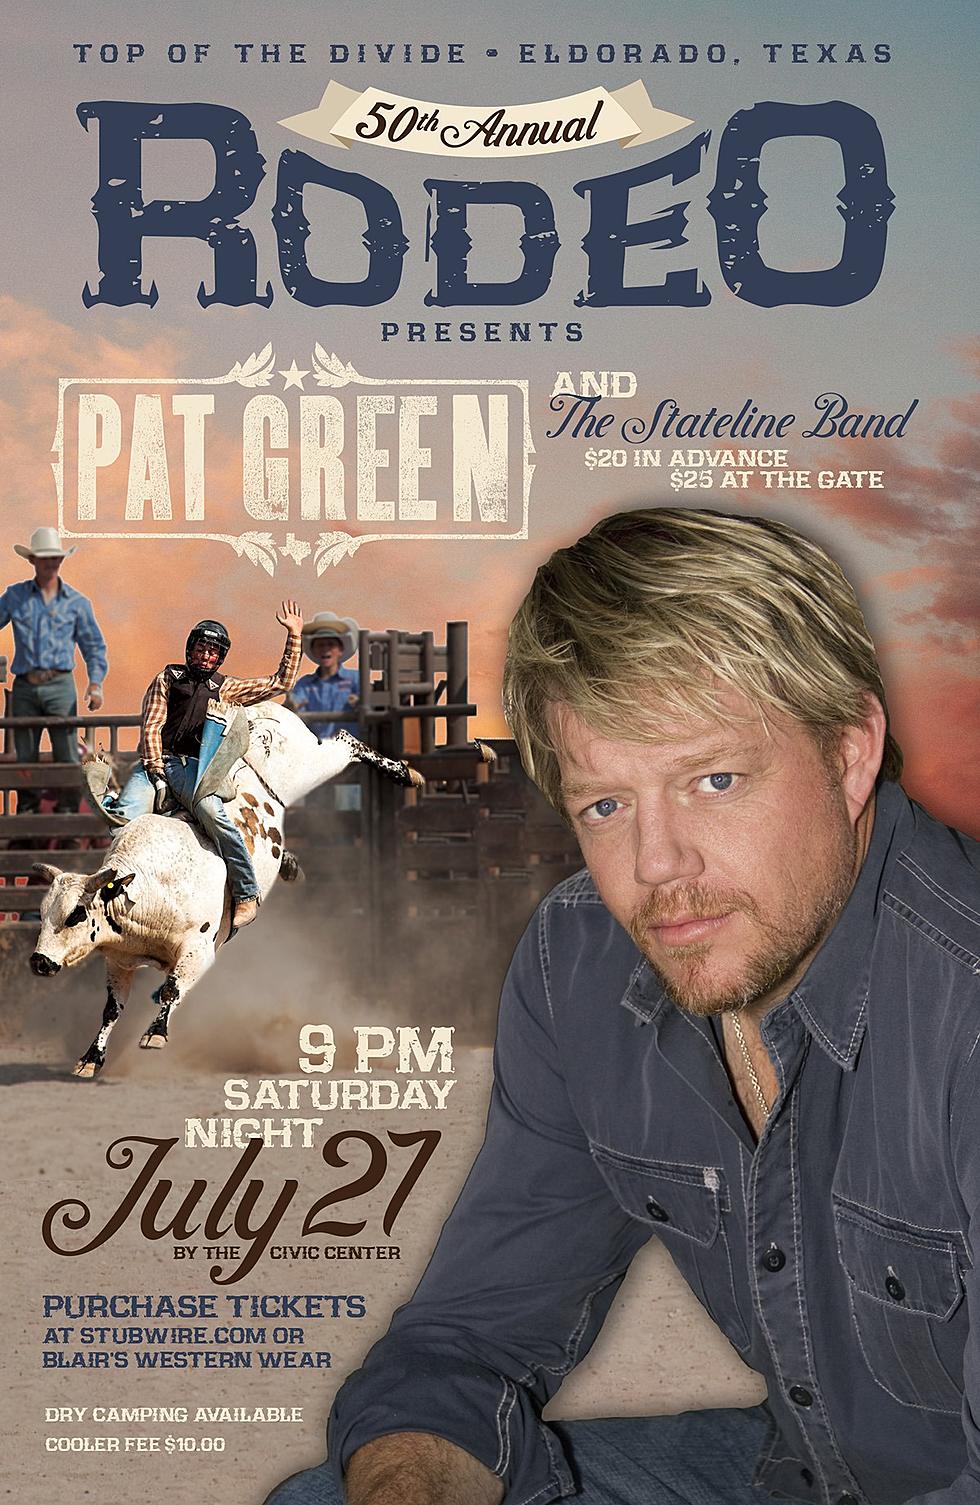 Pat Green Is Coming This Weekend and We Have Your Free Tickets